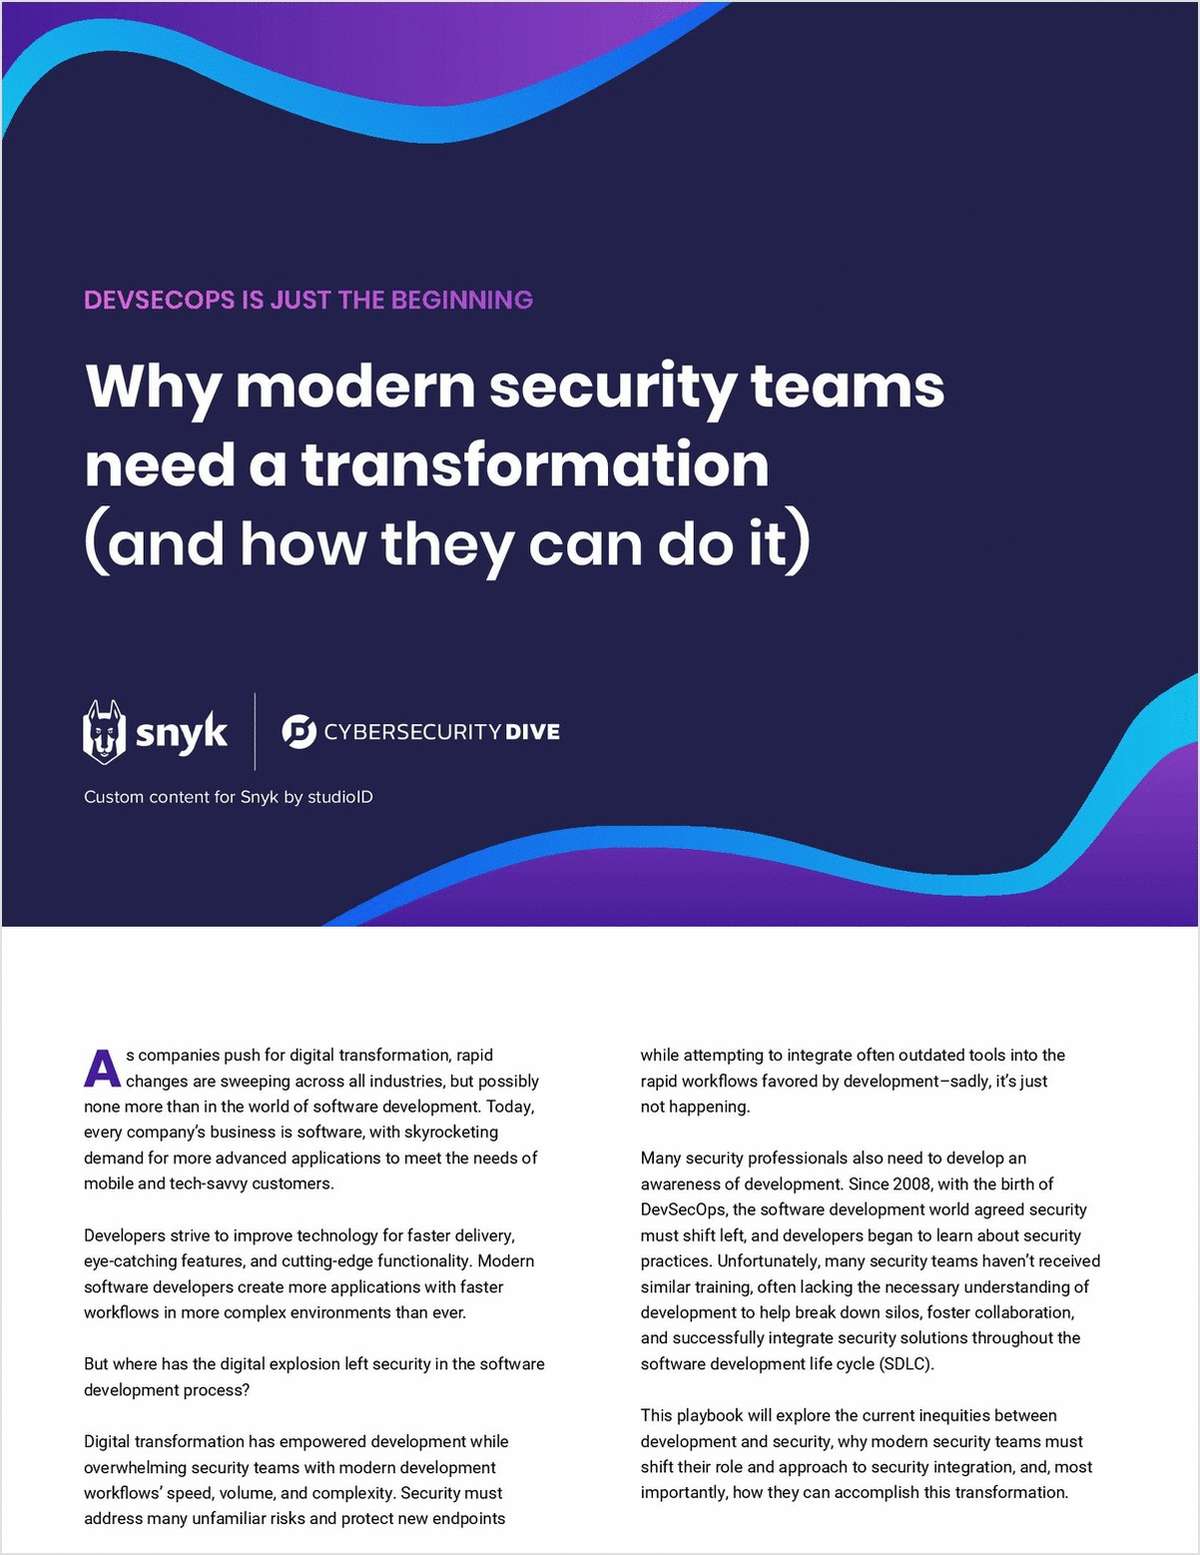 DevSecOps is Just the Beginning Playbook: Why modern security teams need a transformation (and how they can do it)